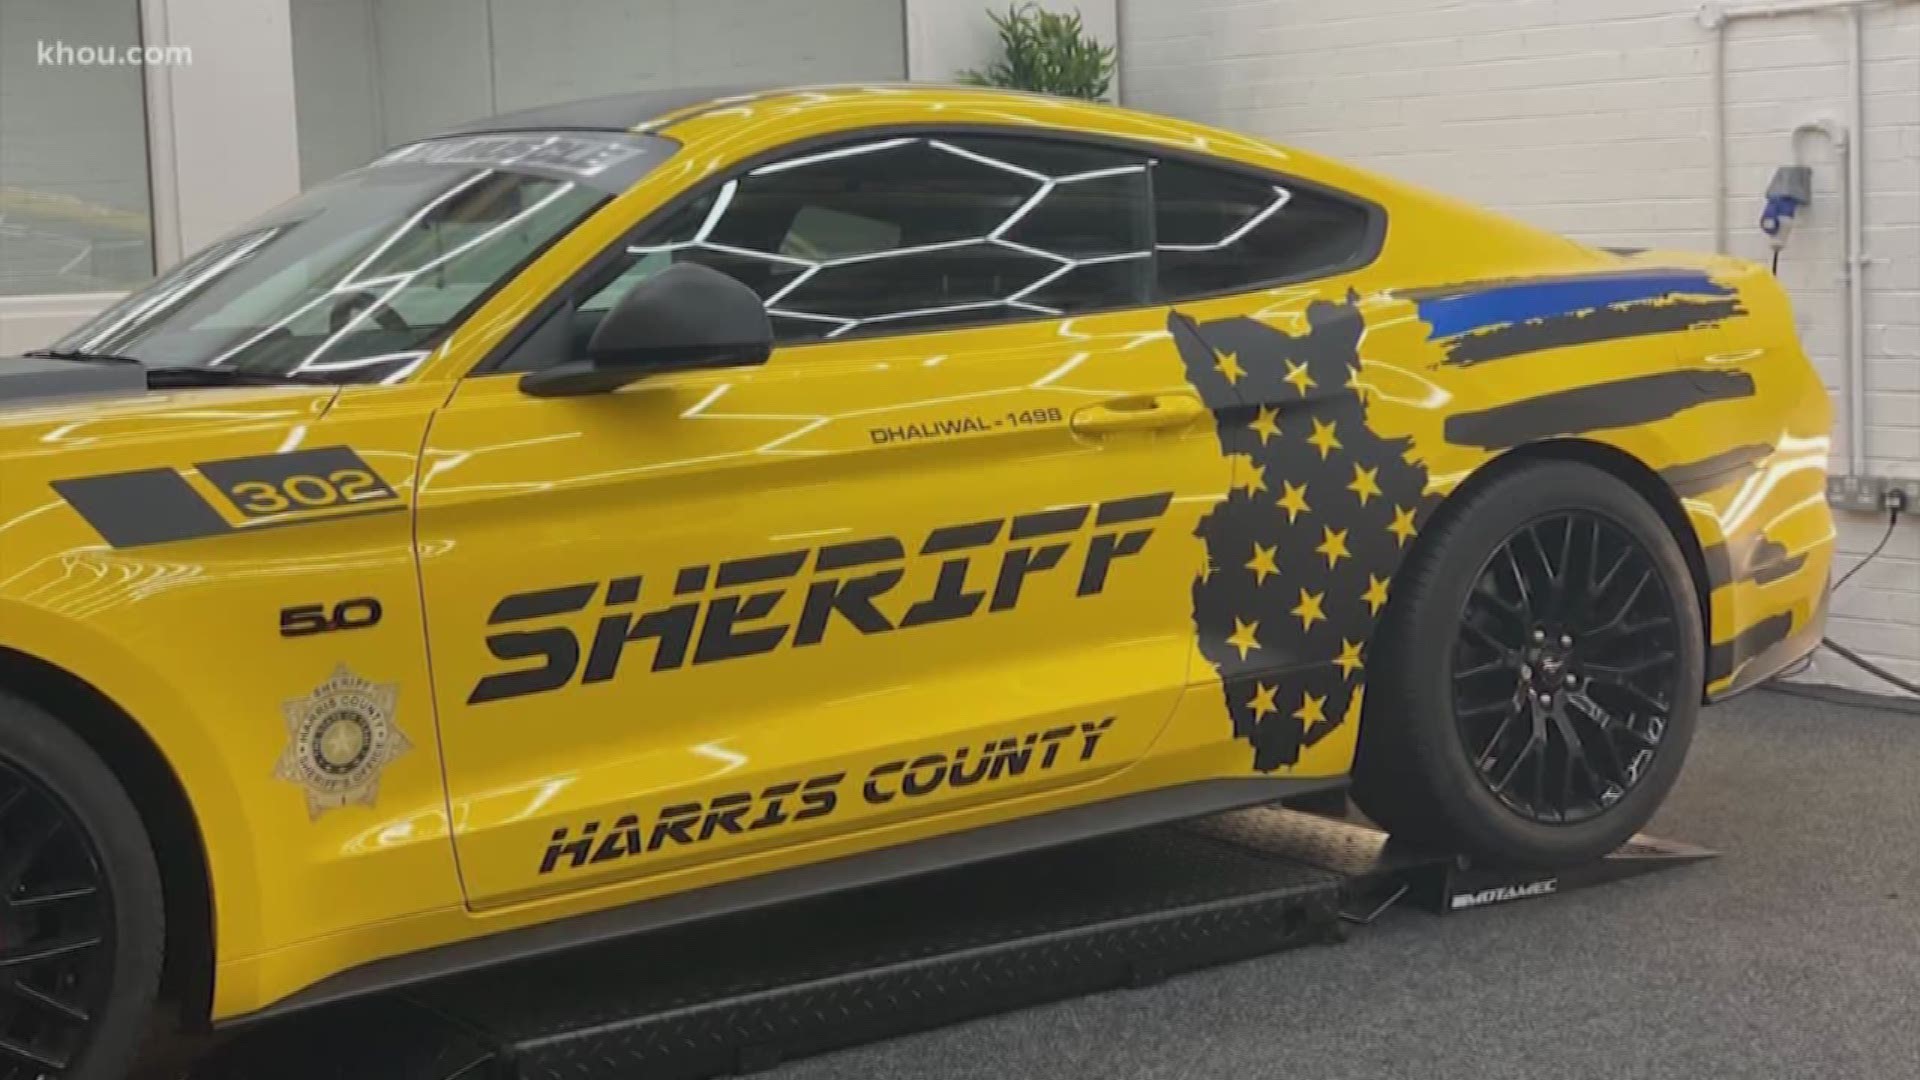 Deputy Sandeep Dhaliwal is being honored in the United Kingdom with a bright, yellow sports car. It will be shown at Sikh events in his honor.